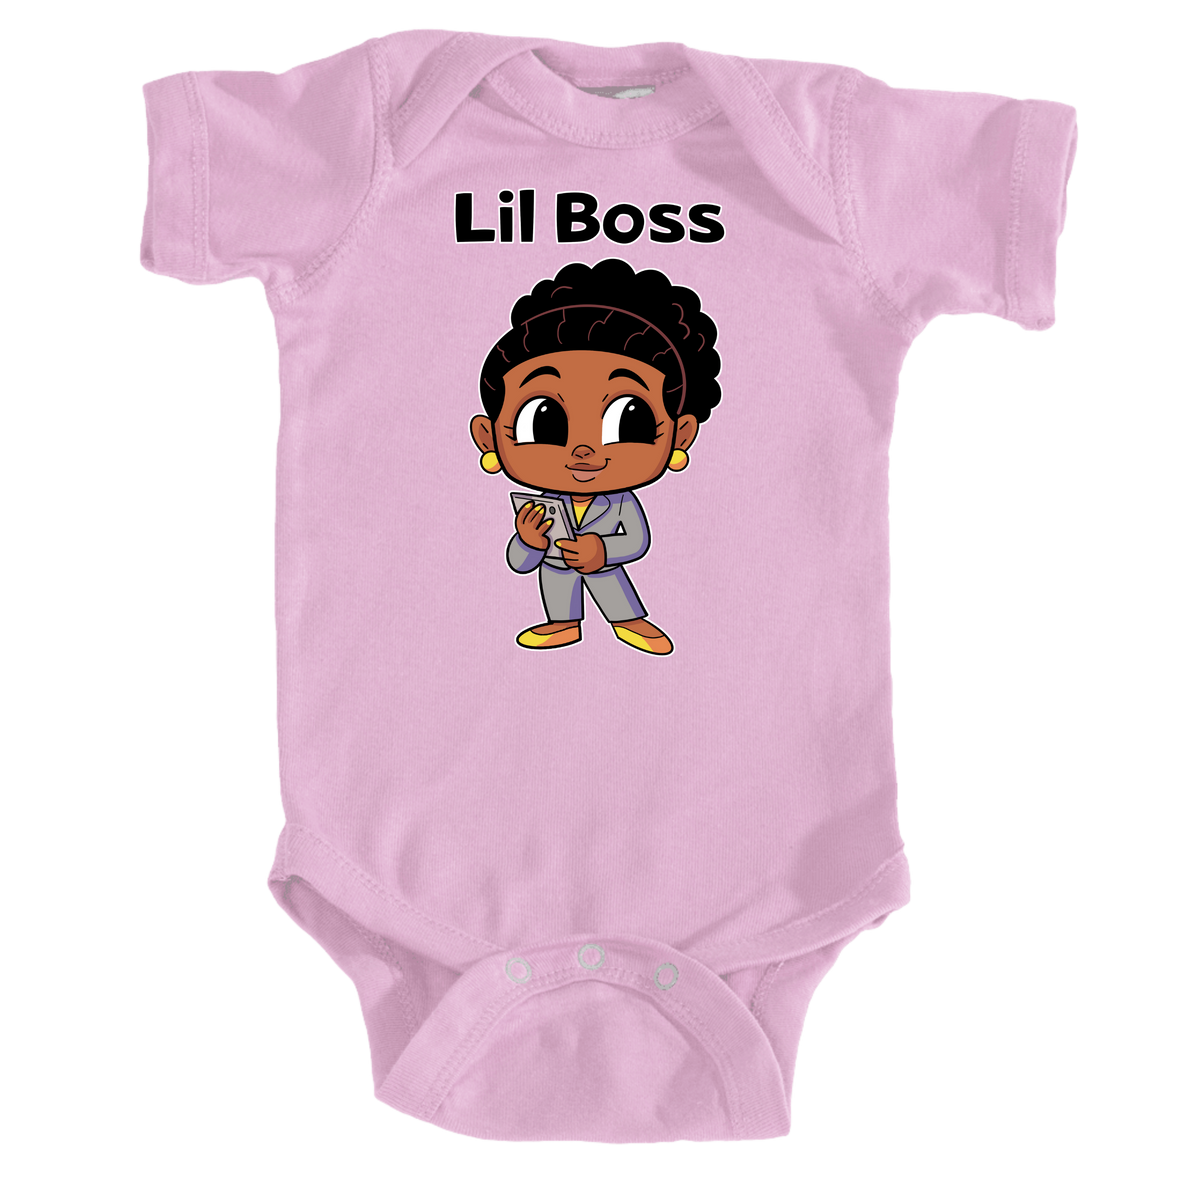 Lil Leaders® Baby & Toddler Girls - Lil Boss